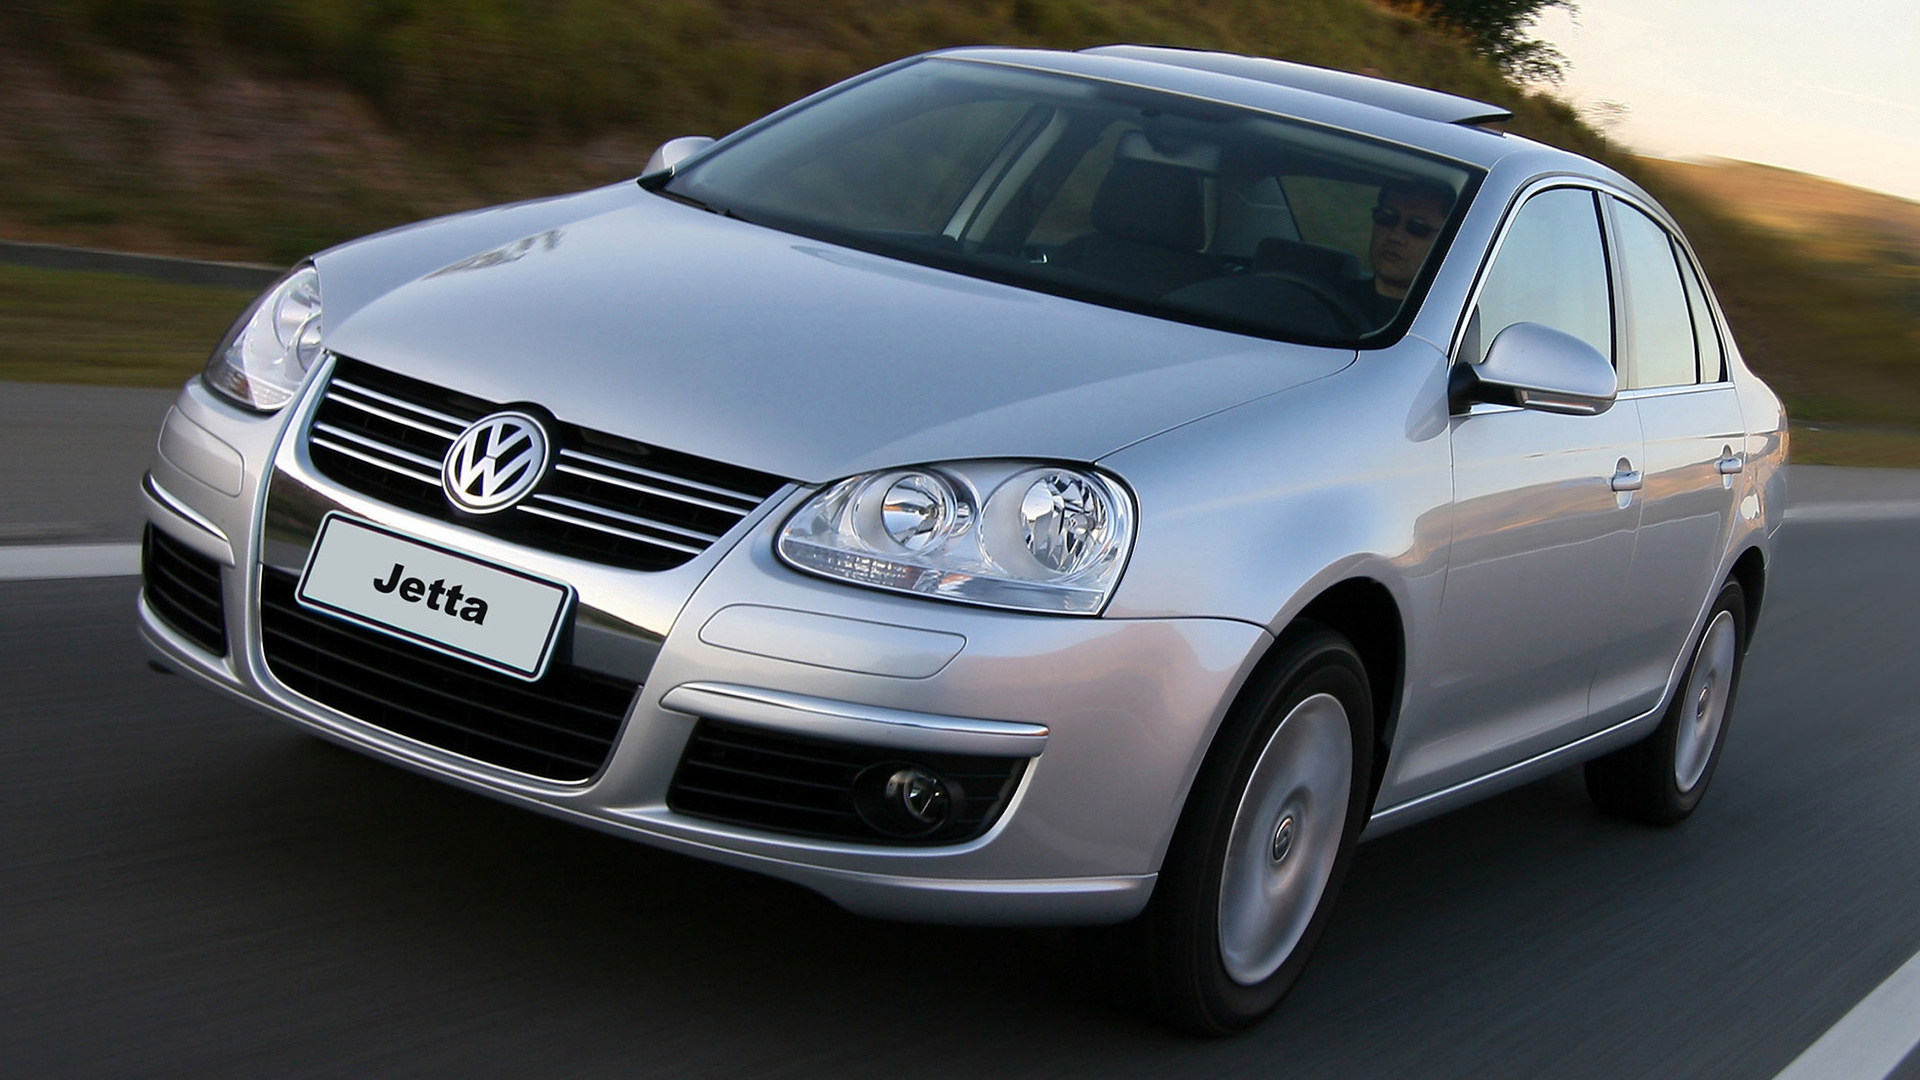 2007 Volkswagen Jetta (BR) Wallpapers and HD Images